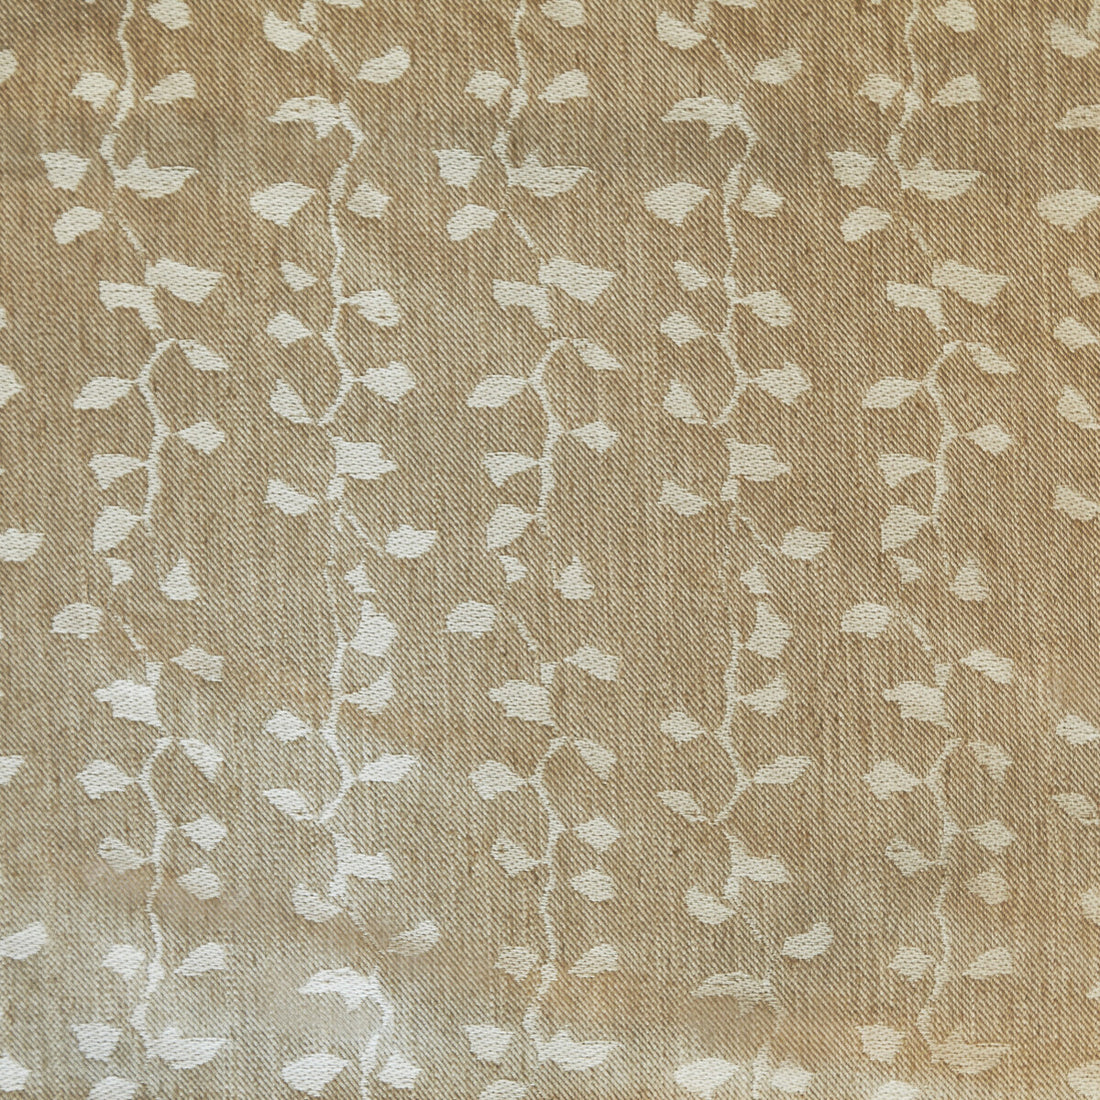 Jungle fabric in natural color - pattern GWF-3203.16.0 - by Lee Jofa Modern in the Allegra Hicks Islands collection